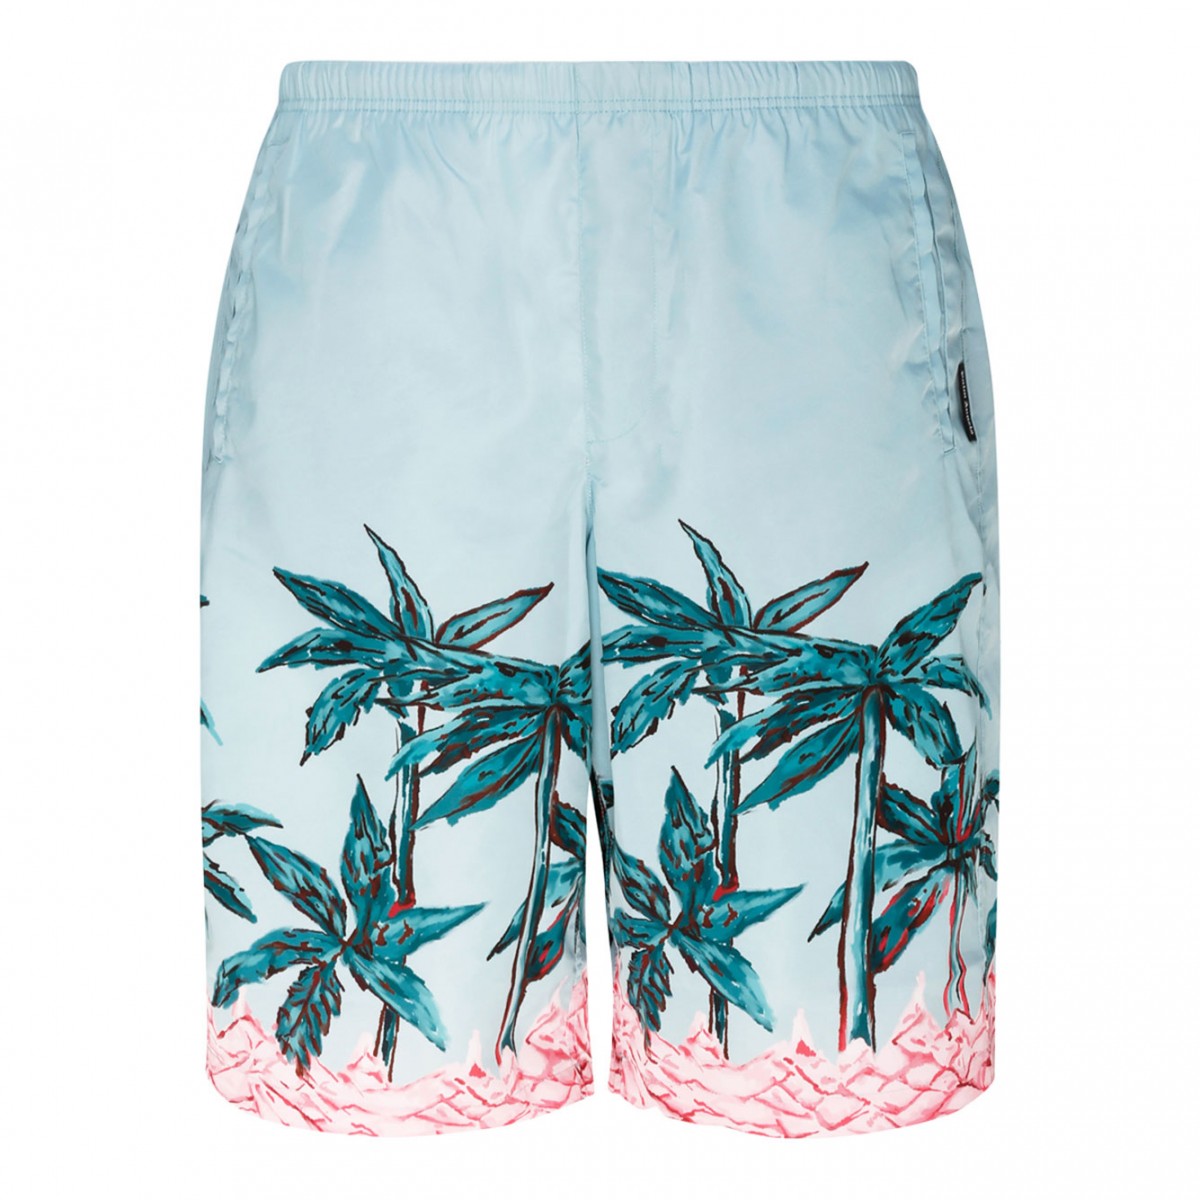 Light Blue, Teal Green and Light Pink Graphic Print Swim Shorts